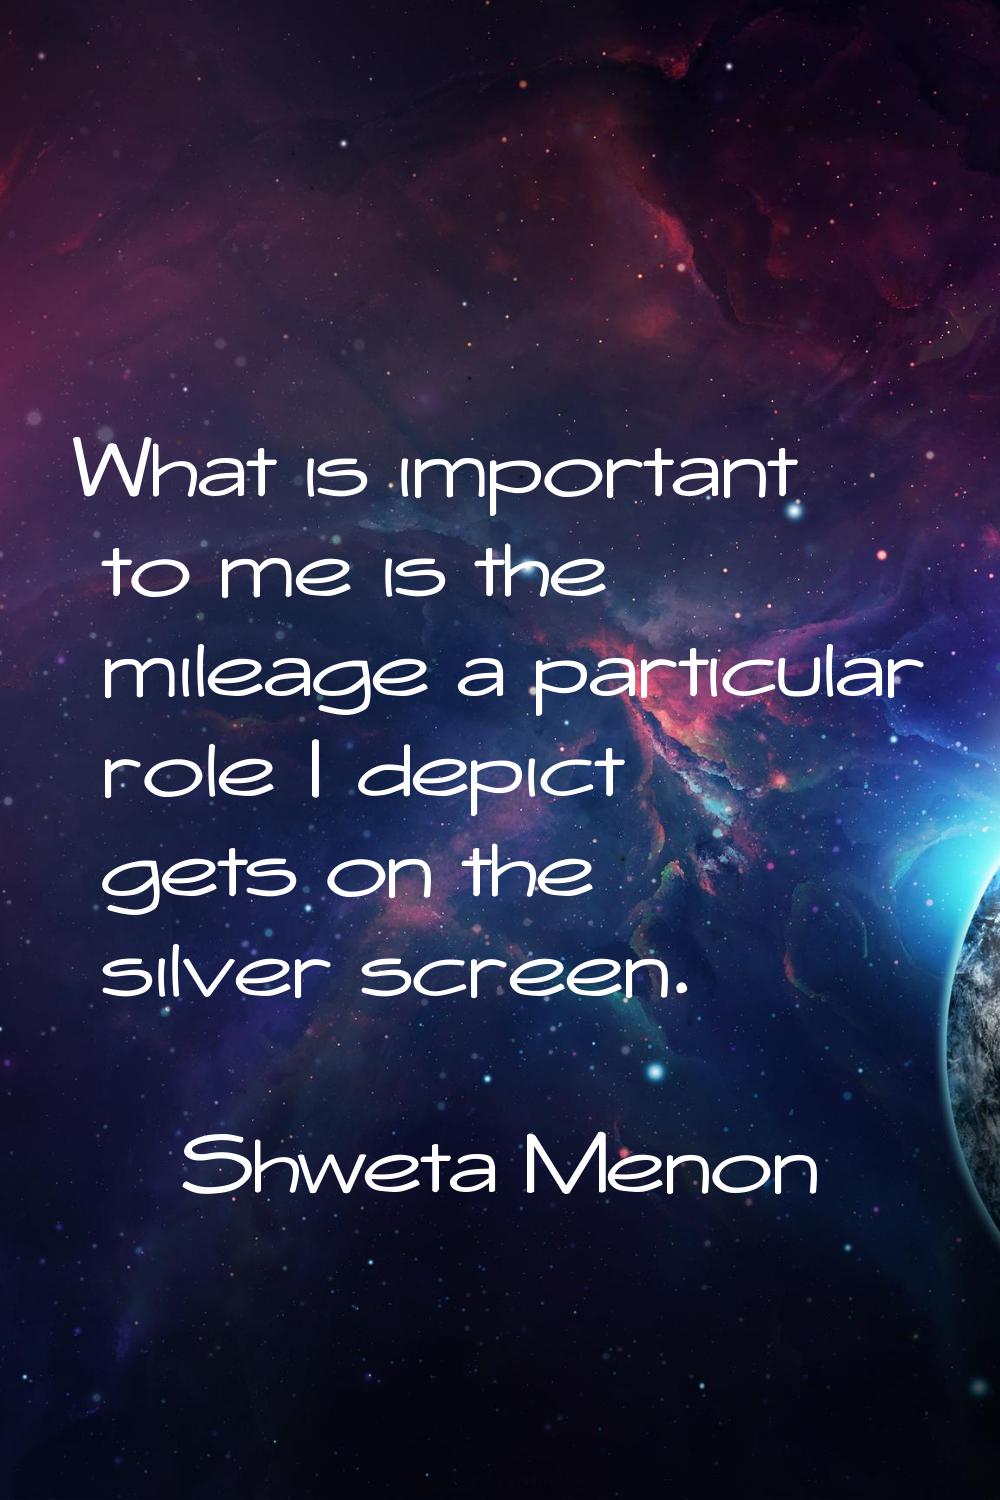 What is important to me is the mileage a particular role I depict gets on the silver screen.